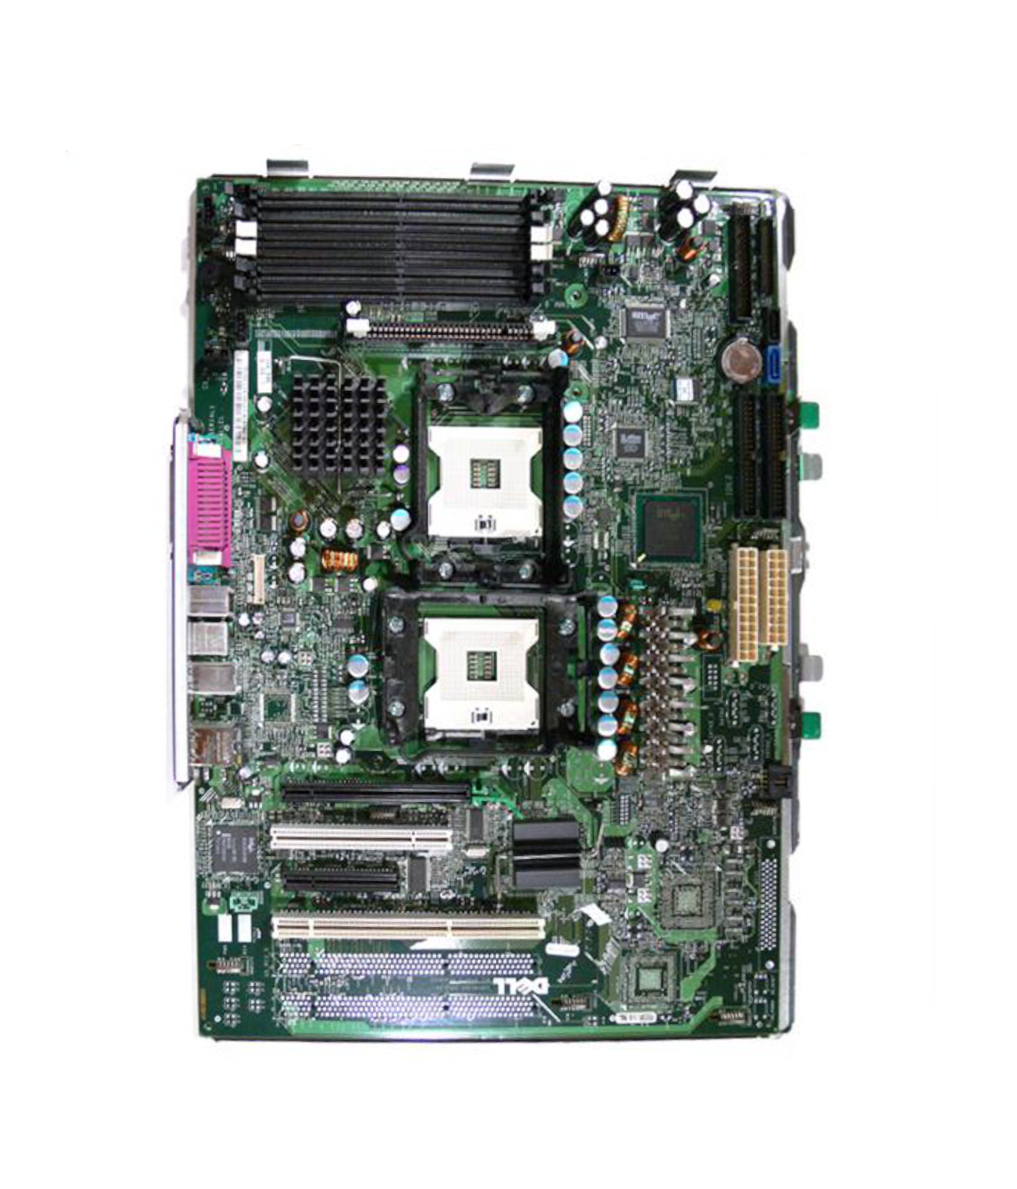 Dell Precision 470 Workstation Motherboard Mainboard 2x Socket 604 XC838